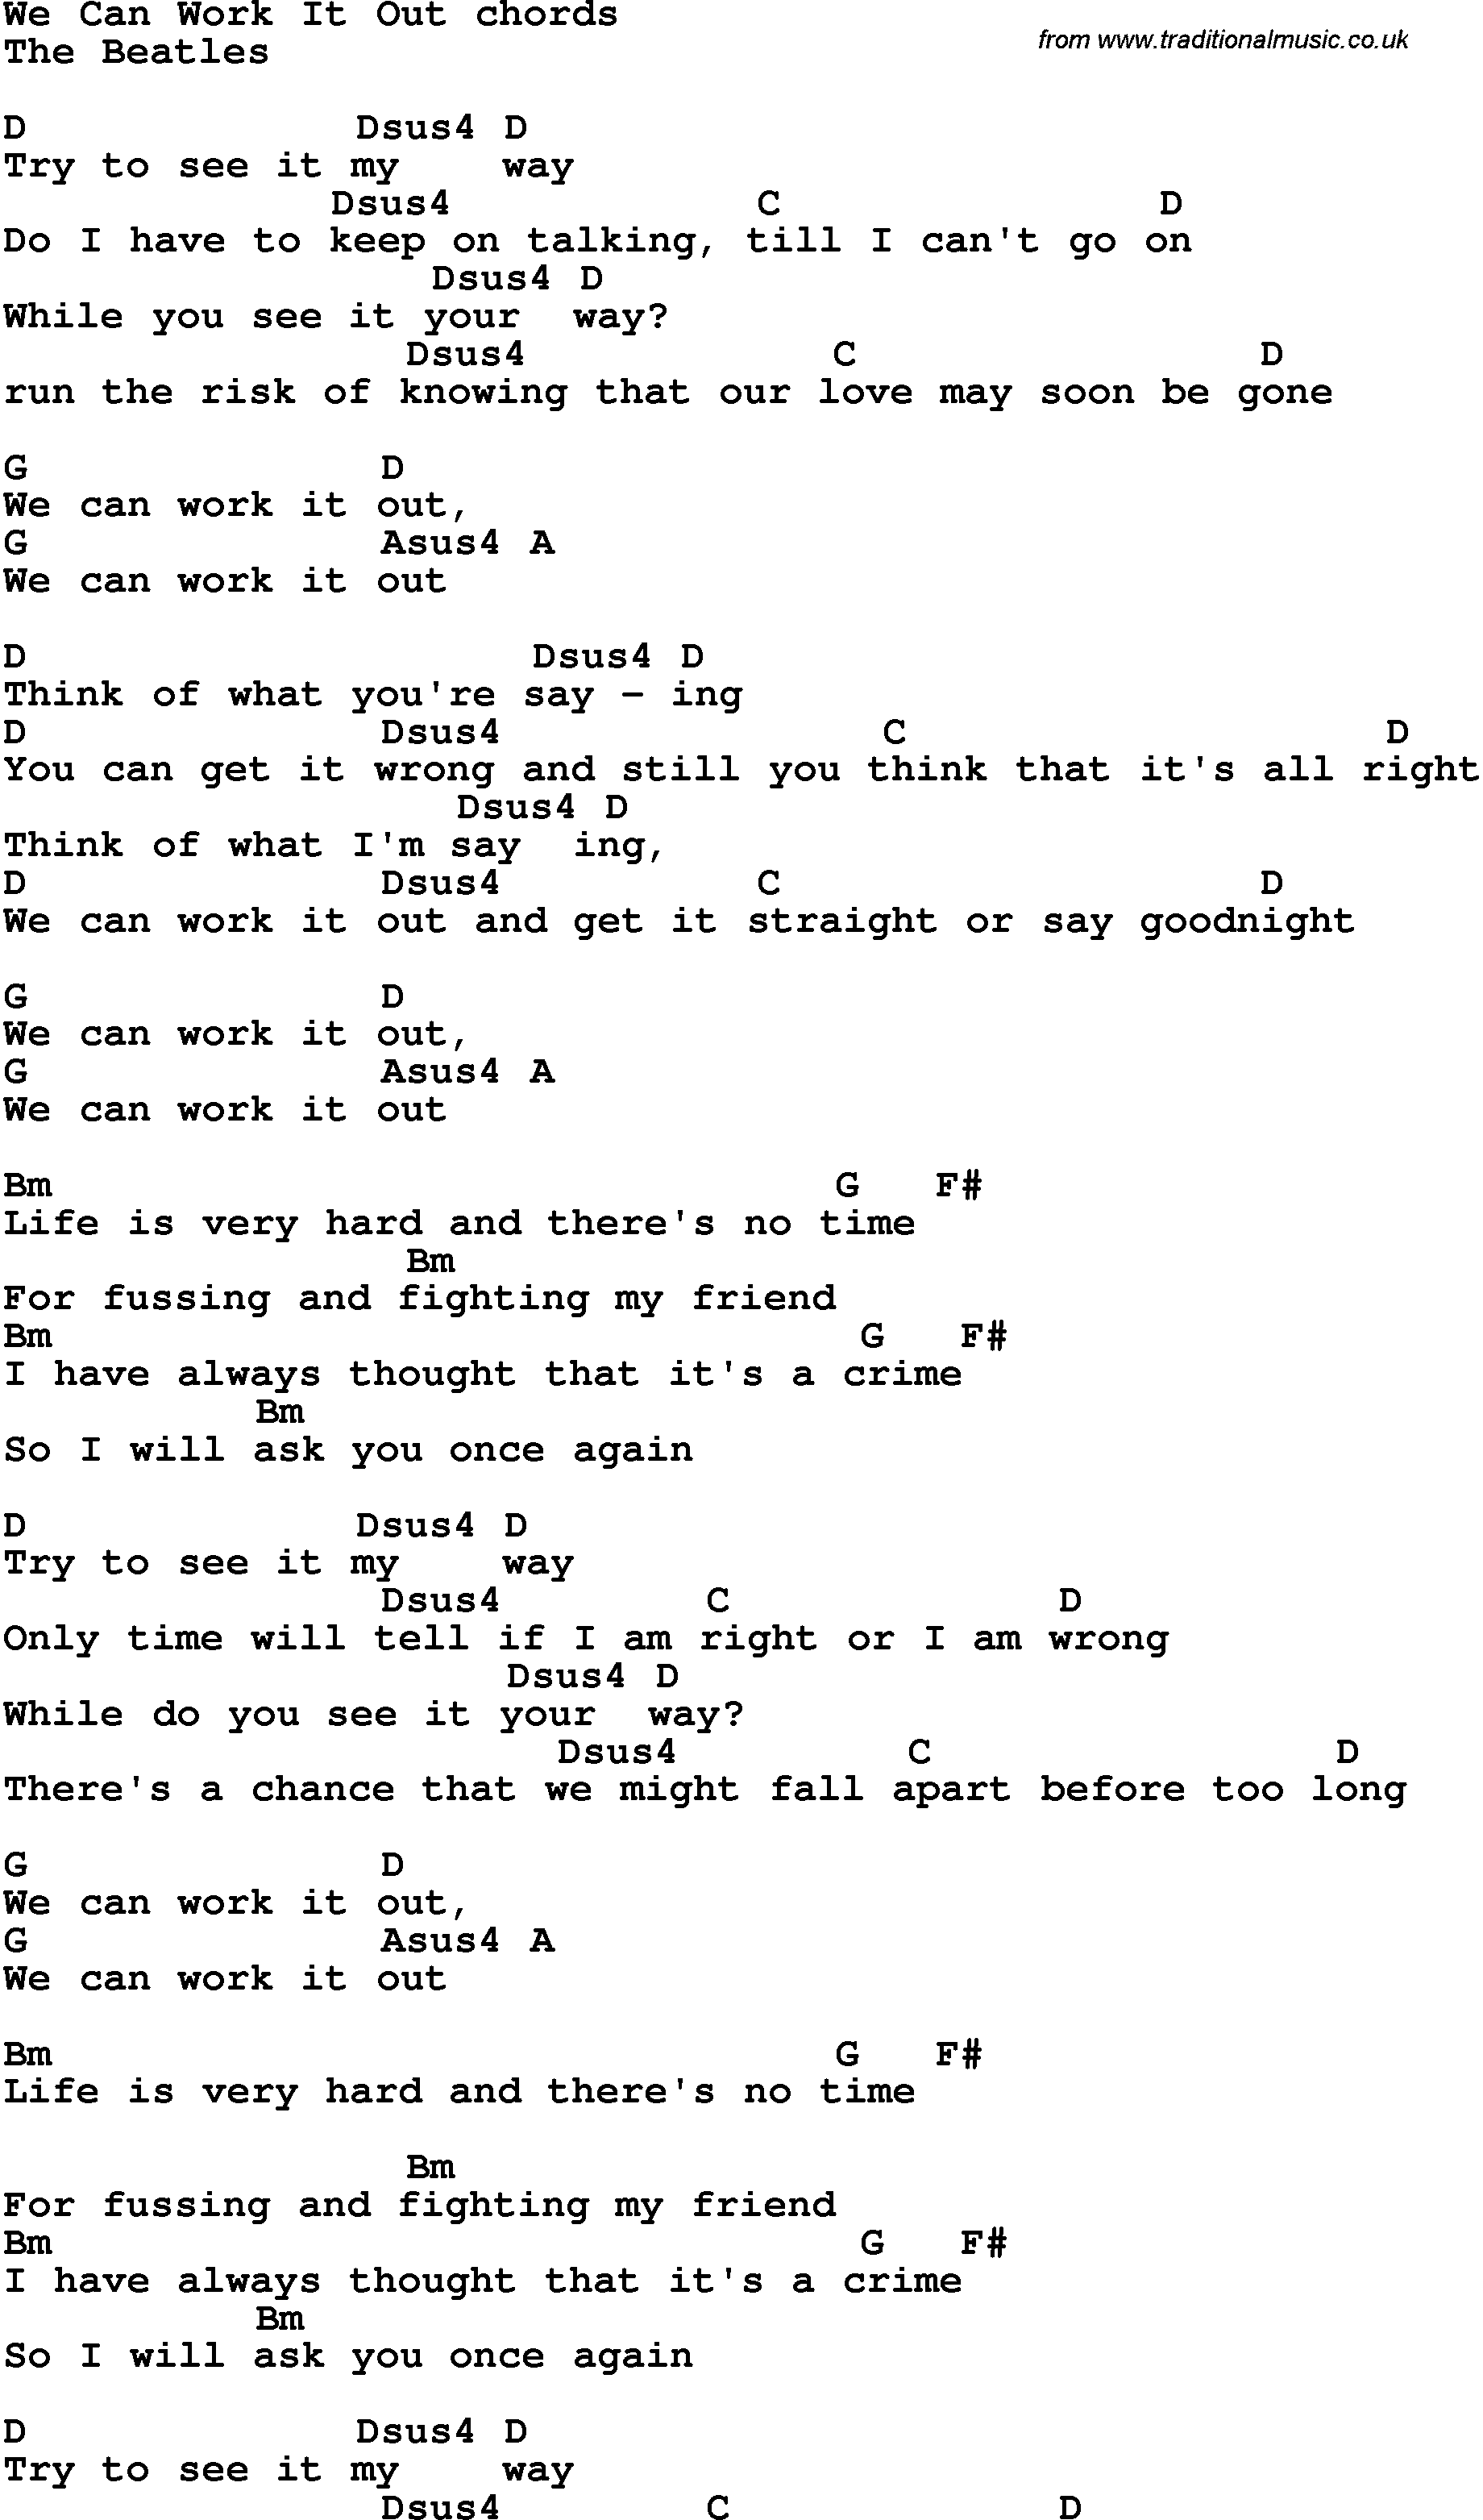 Song Lyrics with guitar chords for We Can Work It Out